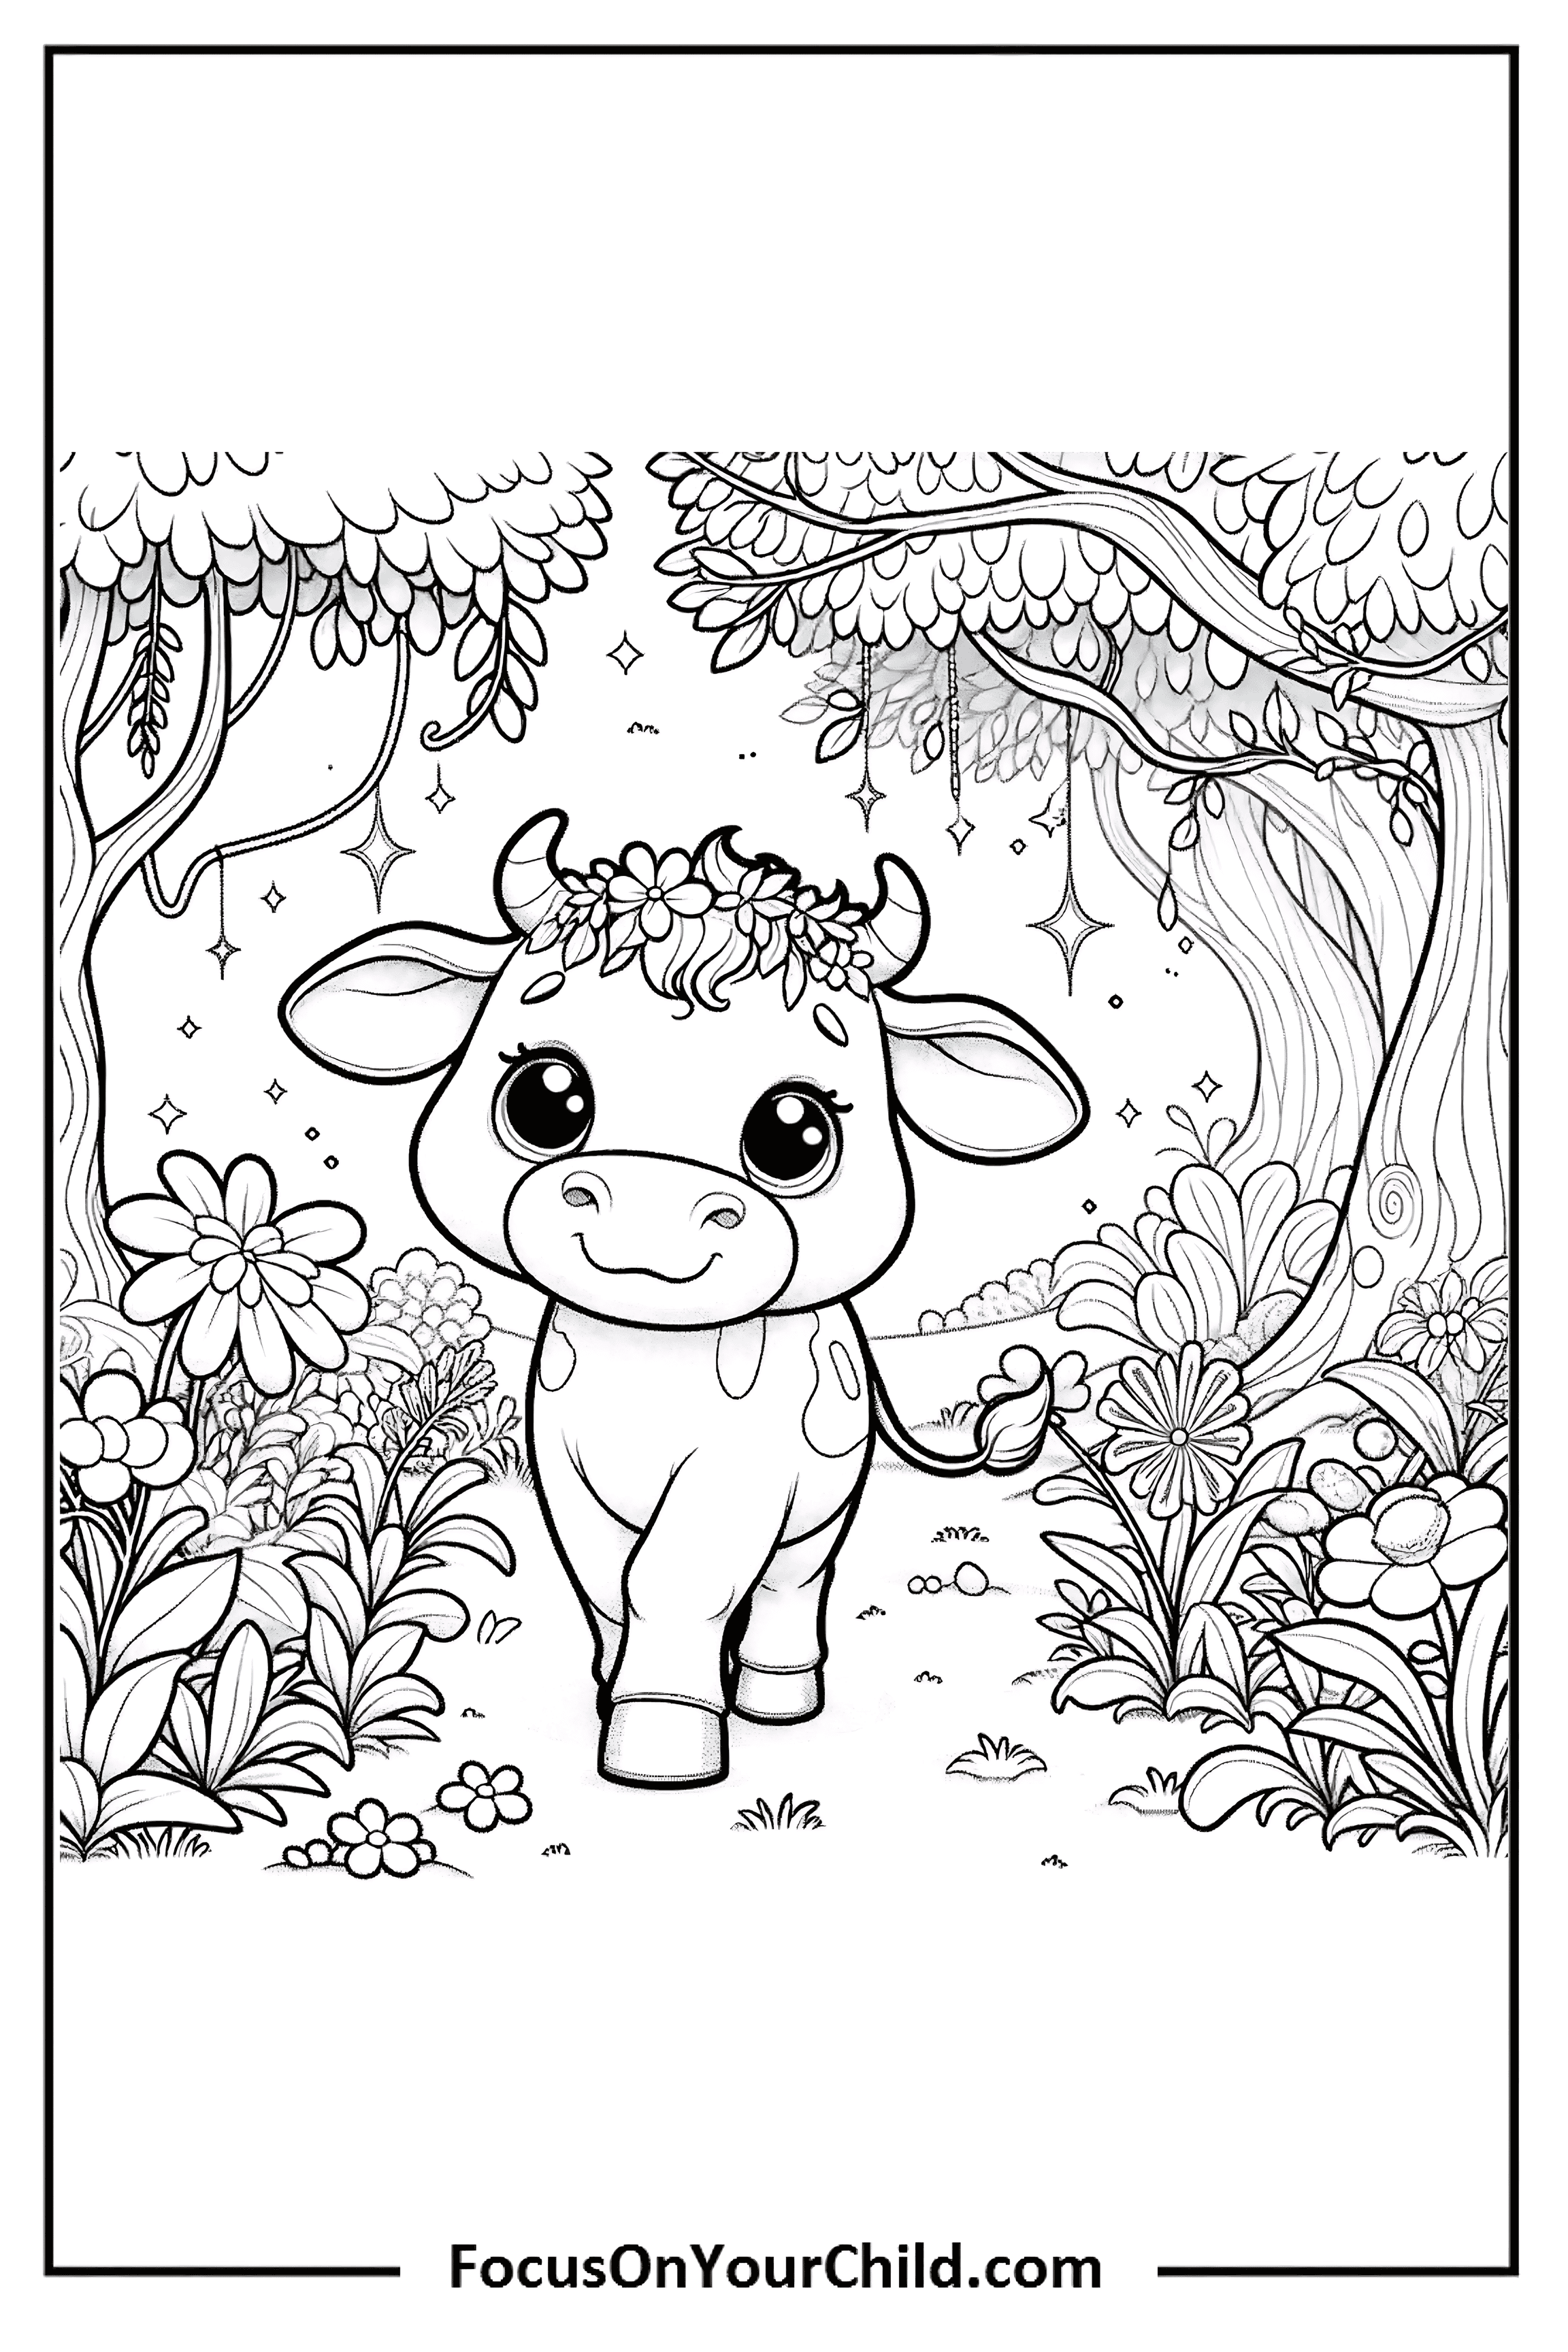 Adorable cow in magical forest, perfect for coloring book activities.